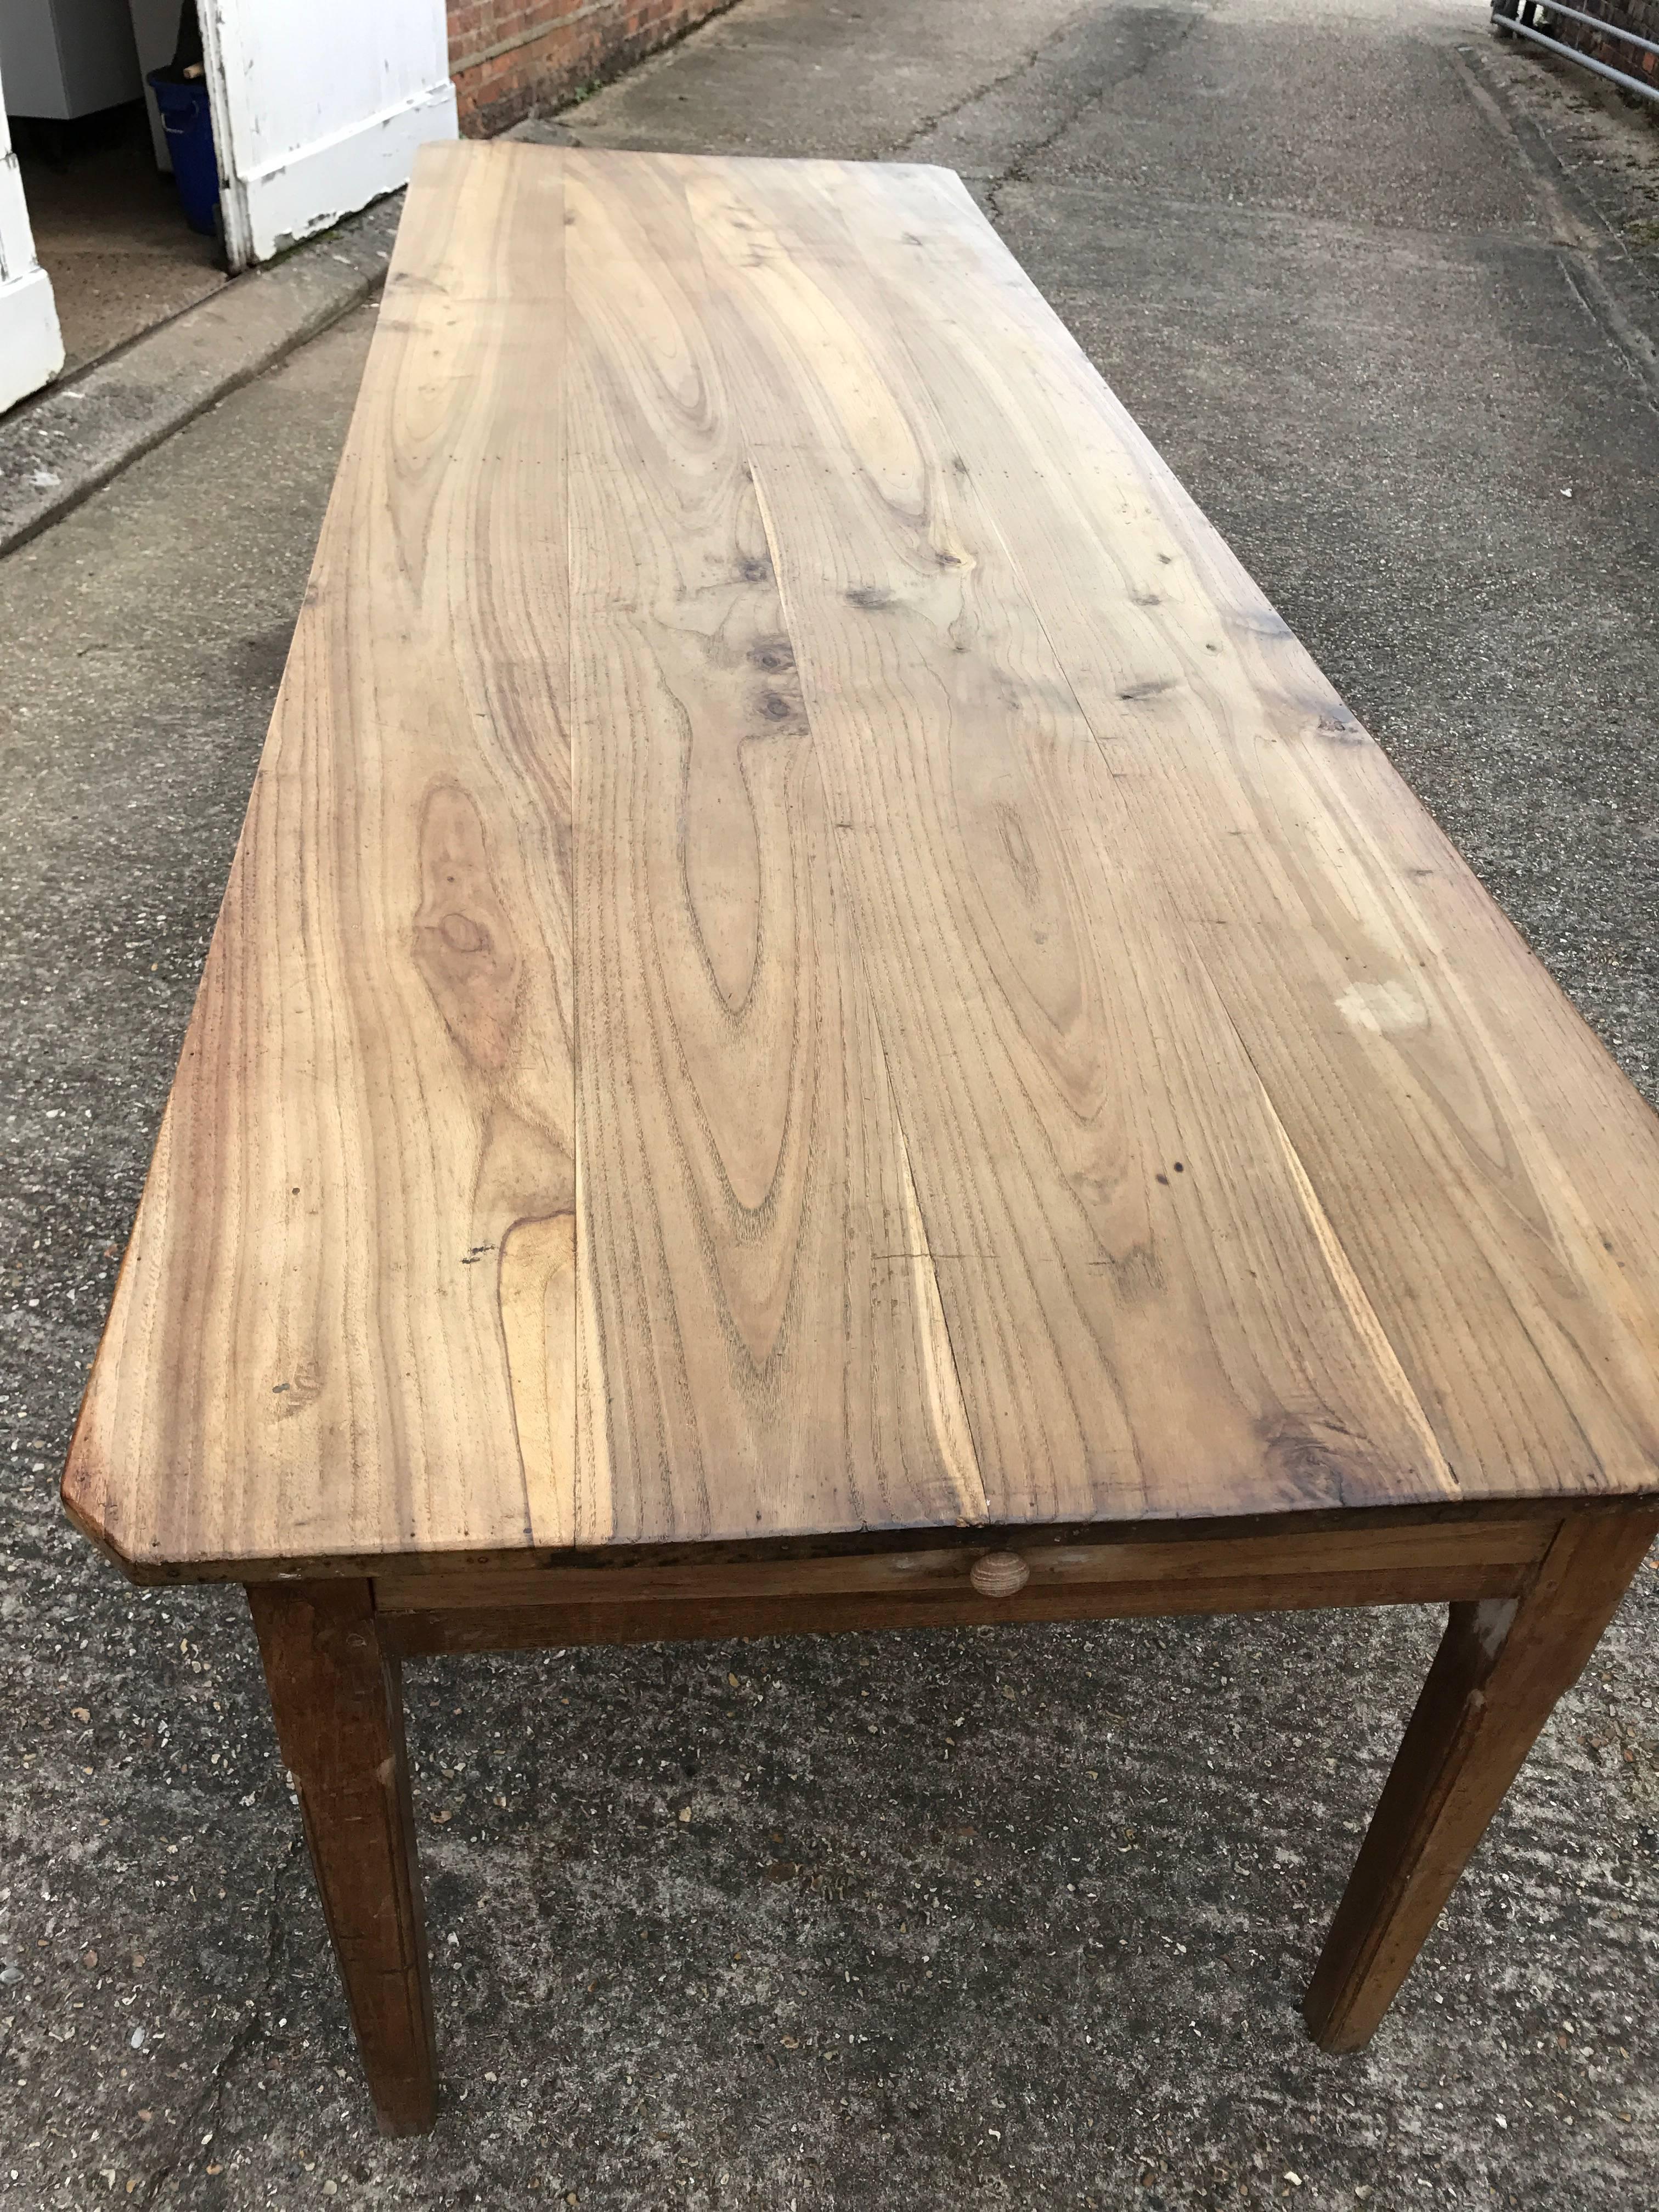 Early 19th century 9' 10 chestnut antique farmhouse table. A very large antique dining table comfortably seating 12 people. This table sits on a very sturdy base with tapered legs and one drawer on the end. The top comprises of a four plank top with